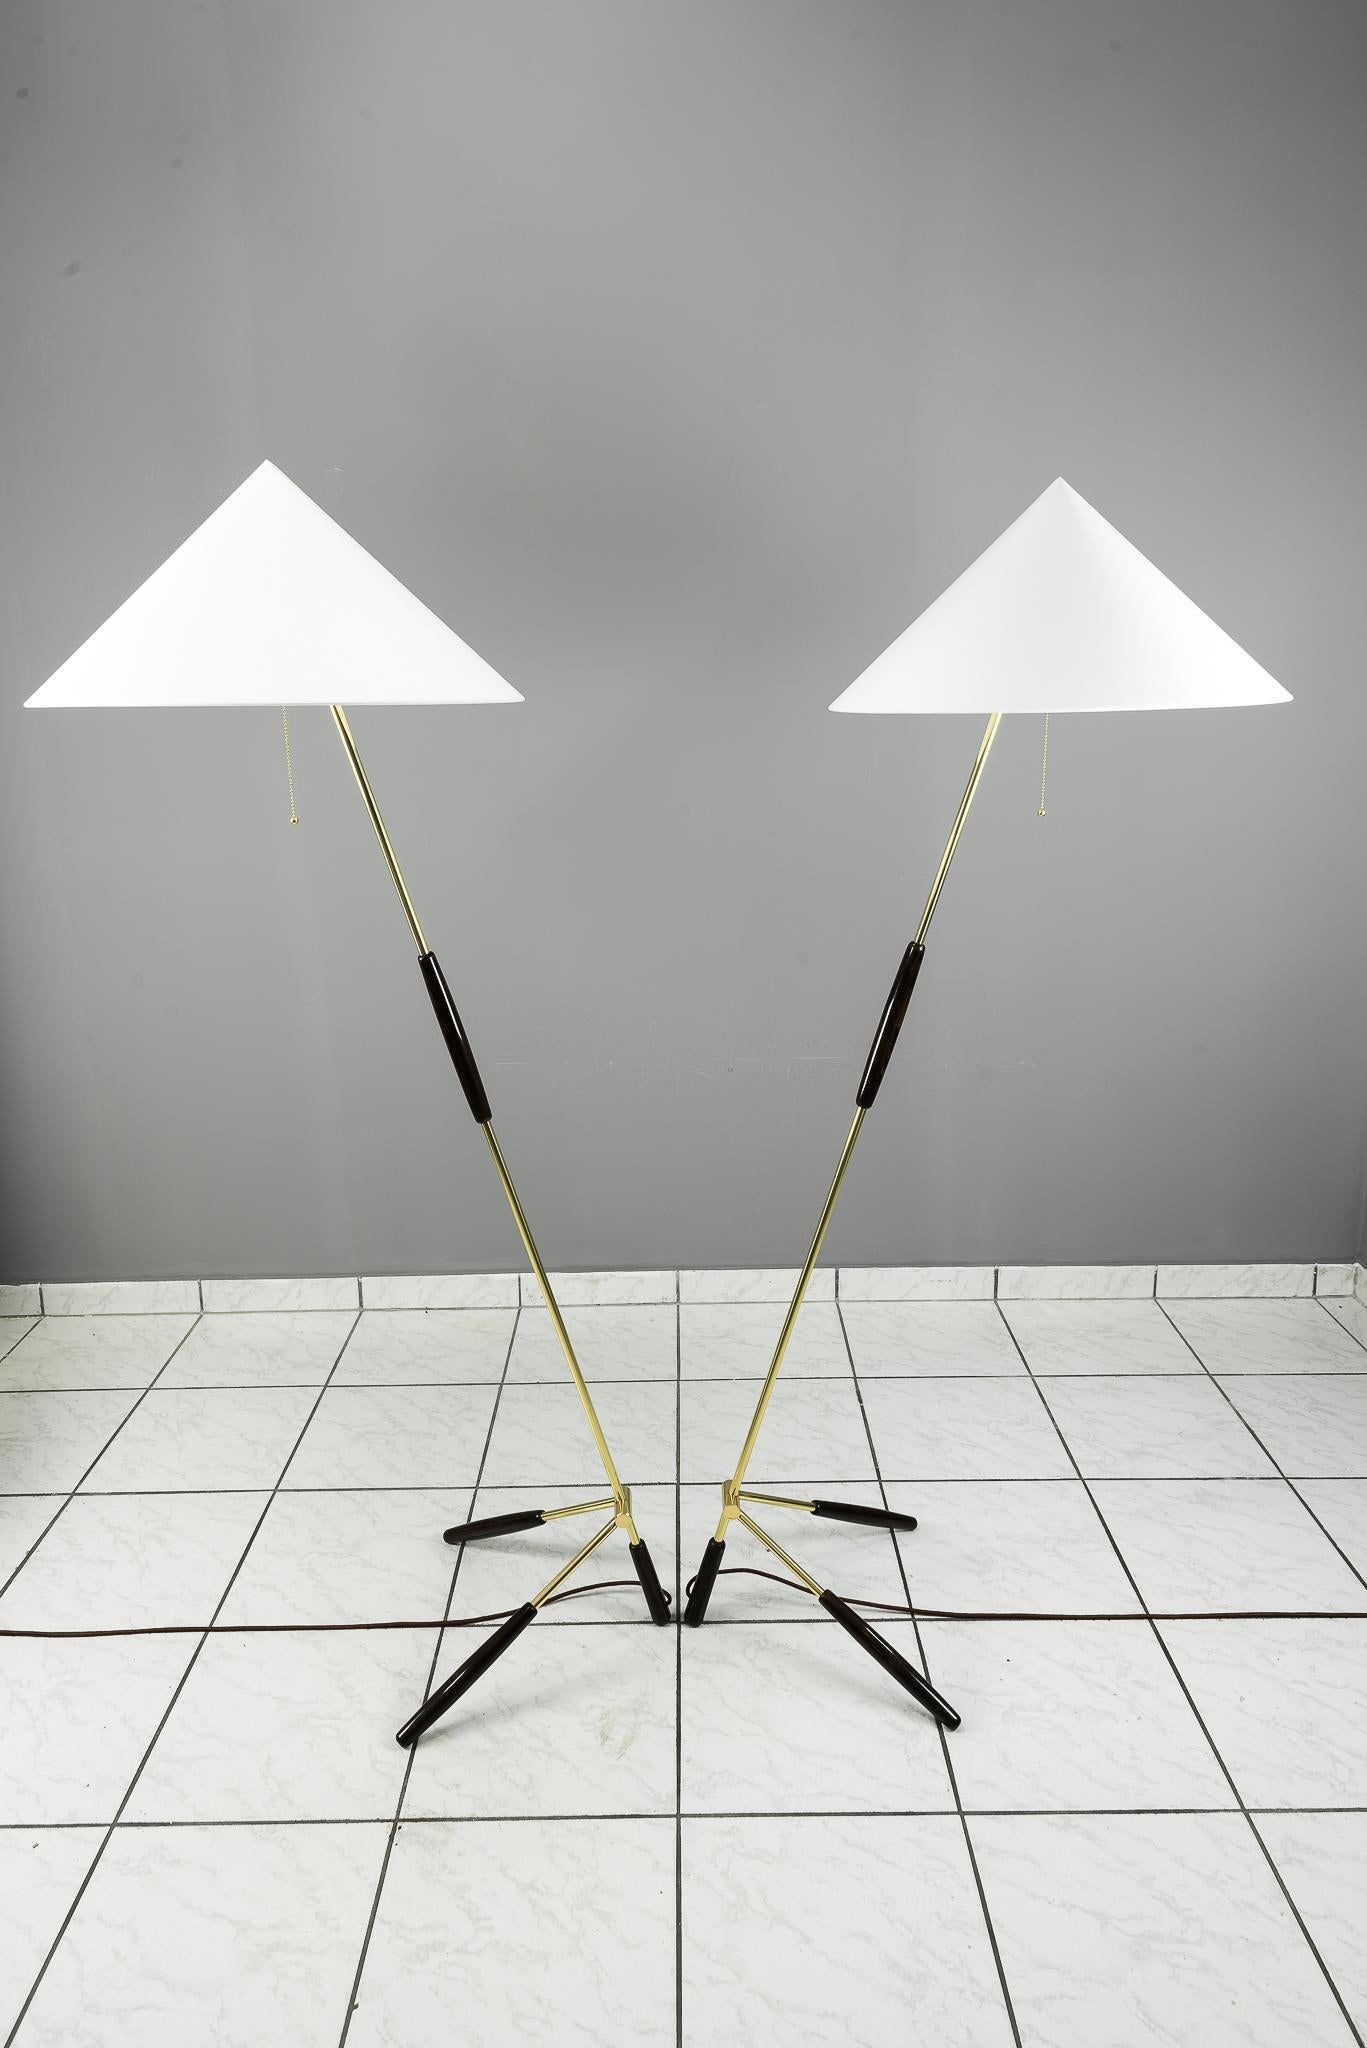 Rupert Nikoll floor lamp, circa 1950s.
The floor lamp is polished and stove enamelled.
The shade is replaced (new).
The original wood handle is polished.
The floor lamp is in a excellent condition.
The price is for both together.